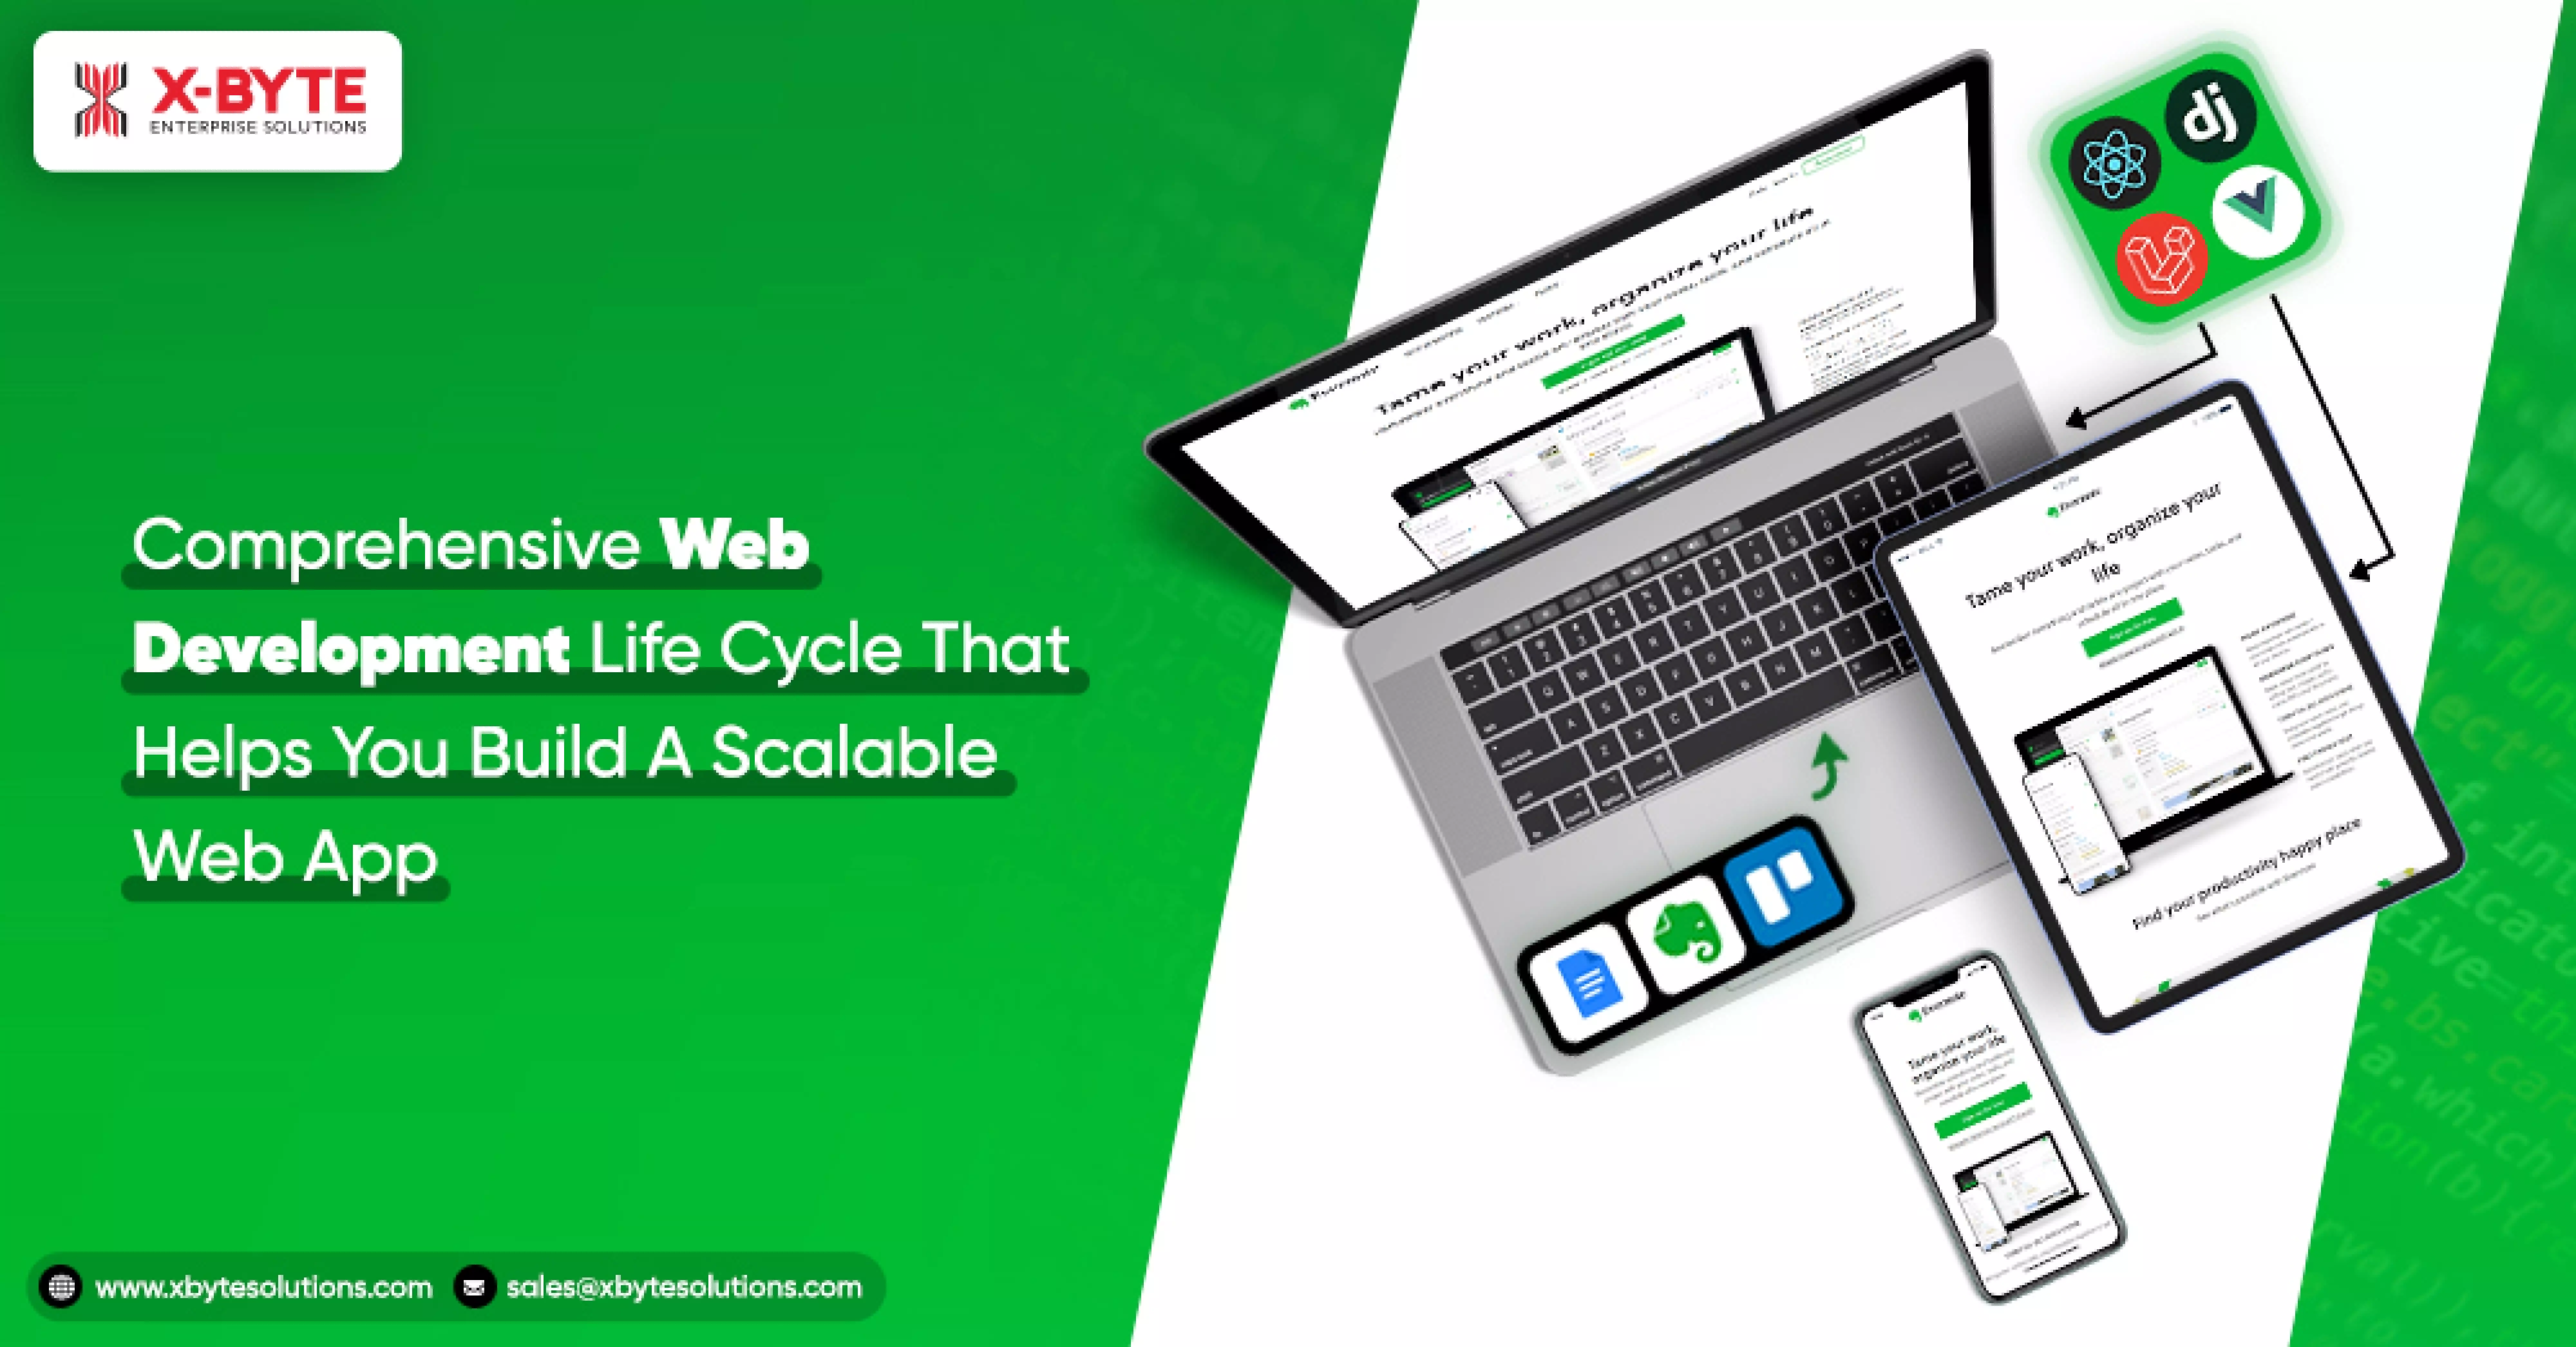 Comprehensive Web Development Life Cycle That Helps You Build A Scalable Web App